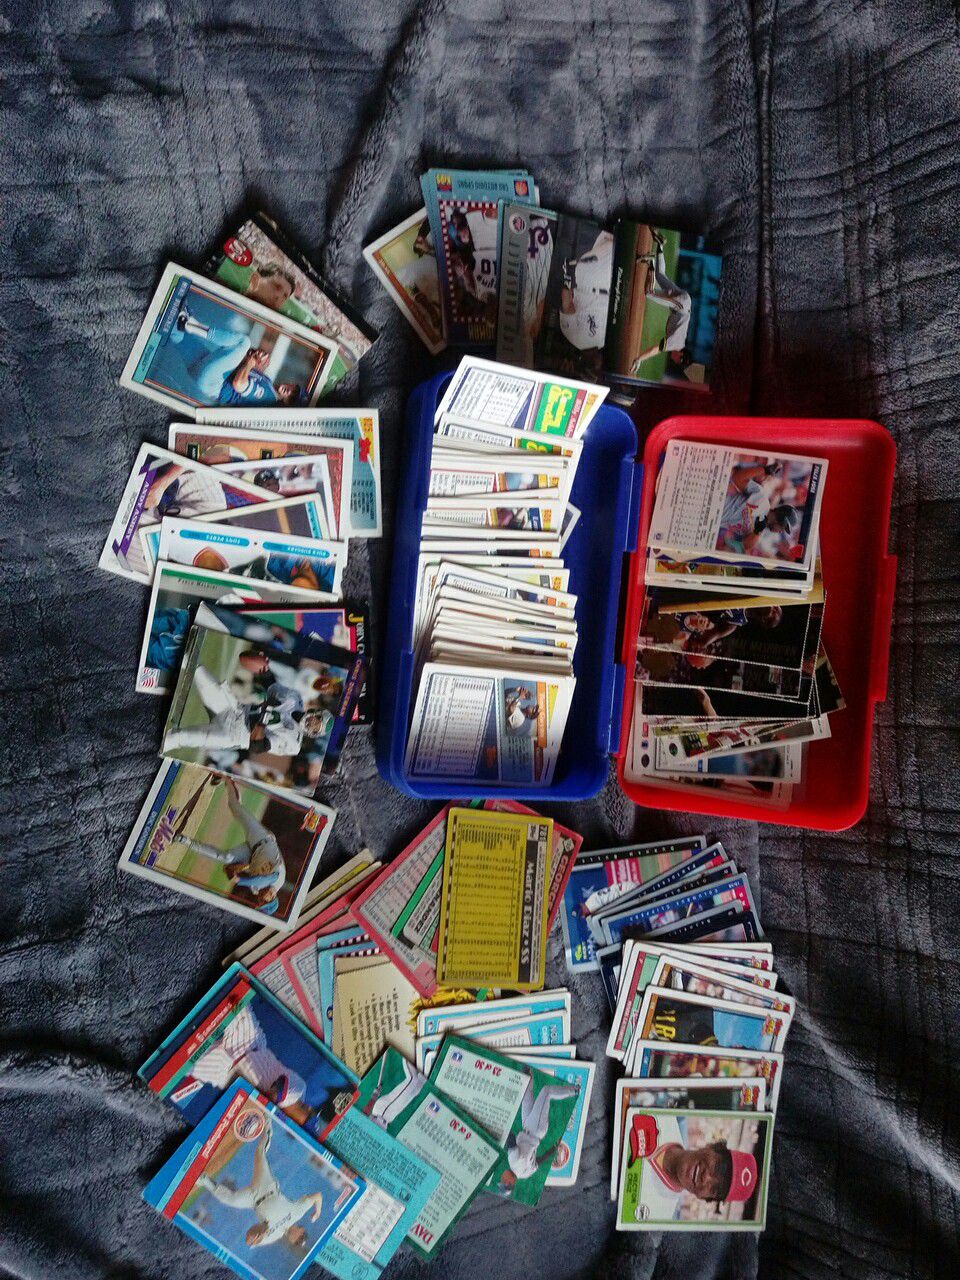 Small plastic box filled with baseball cards